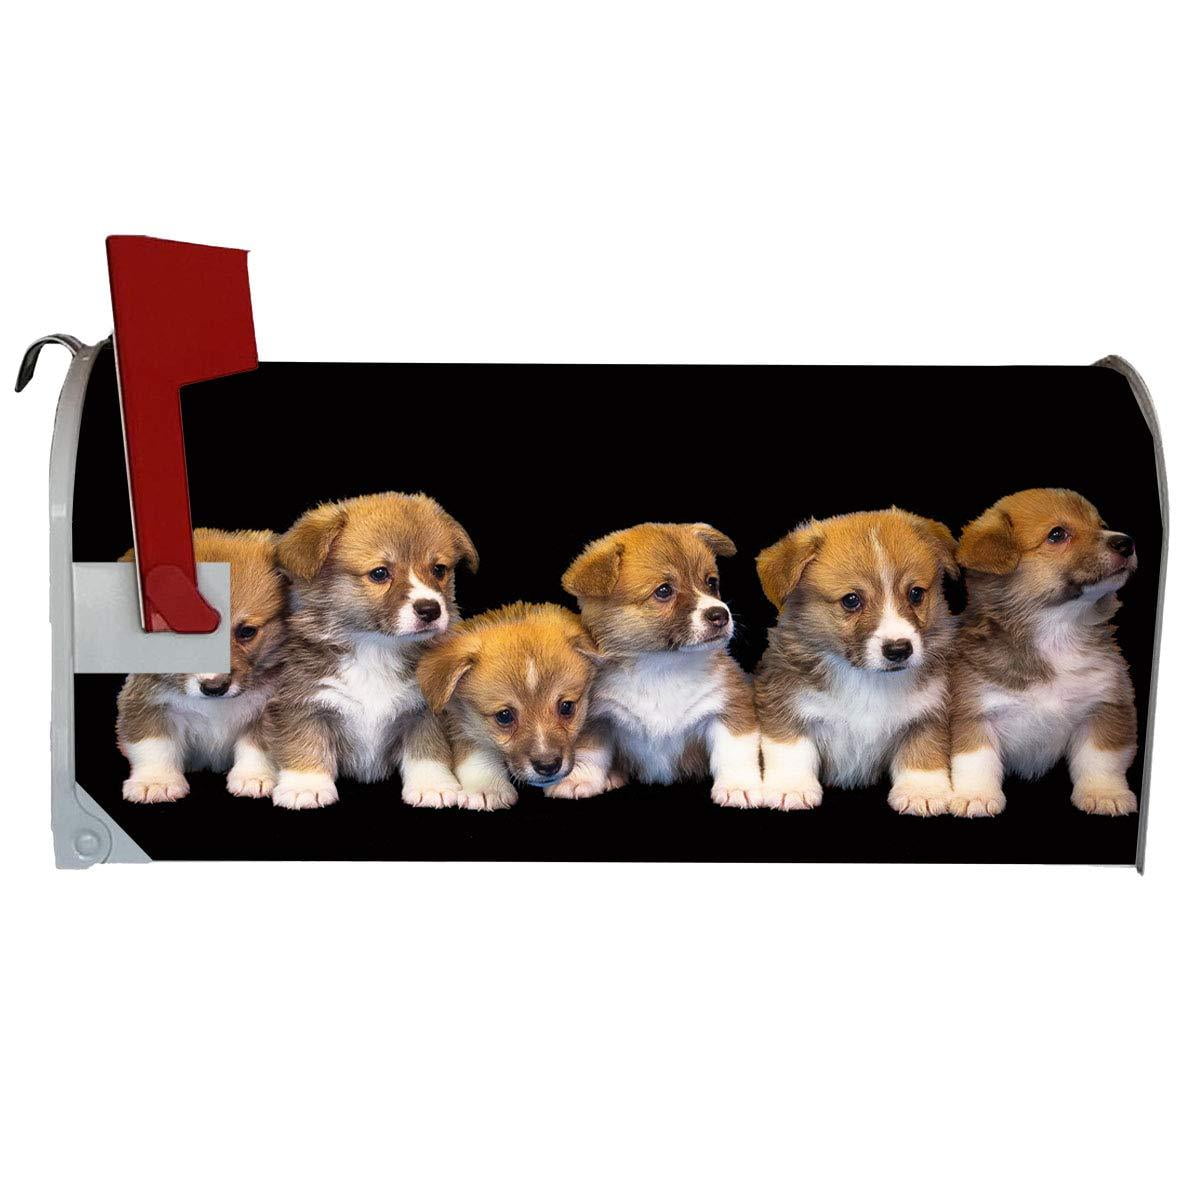 Mailwrap Bringing Home Puppies Mail Box Wrap magnetic mailbox cover Standard 